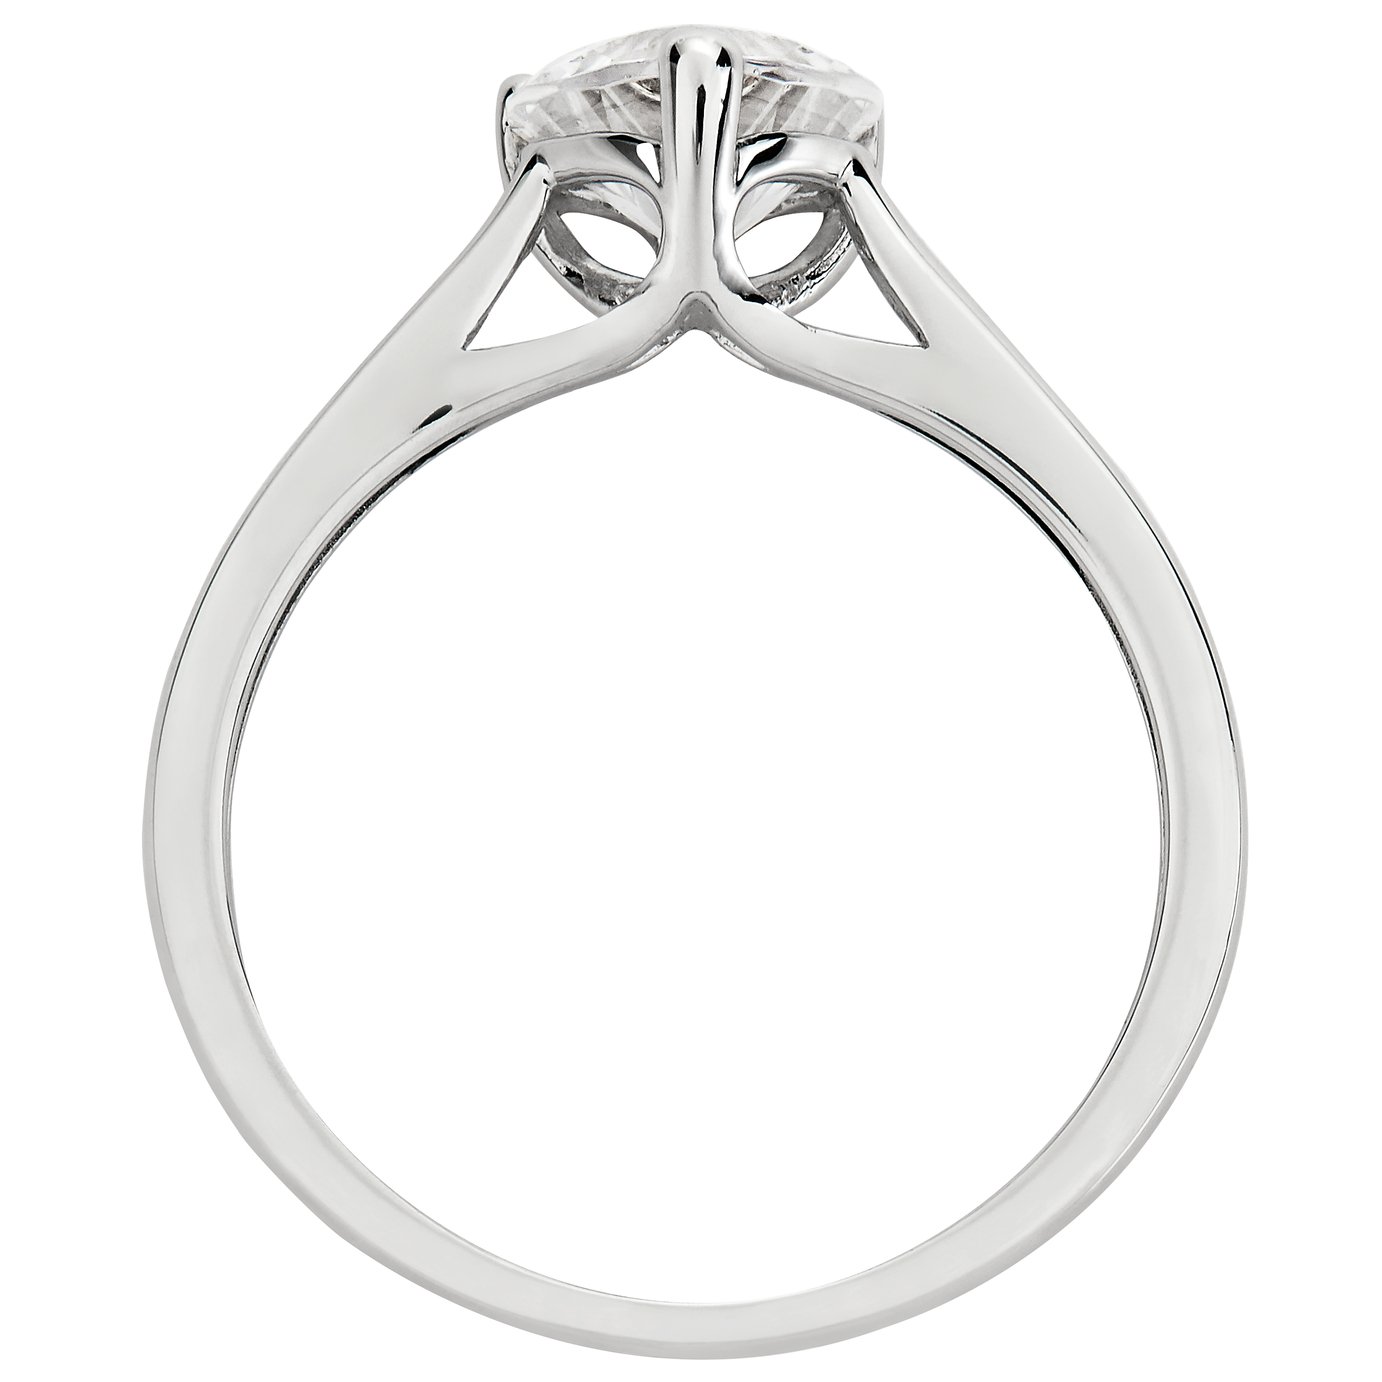 Revere Sterling Silver Heart Cut Cubic Zirconia Ring Review